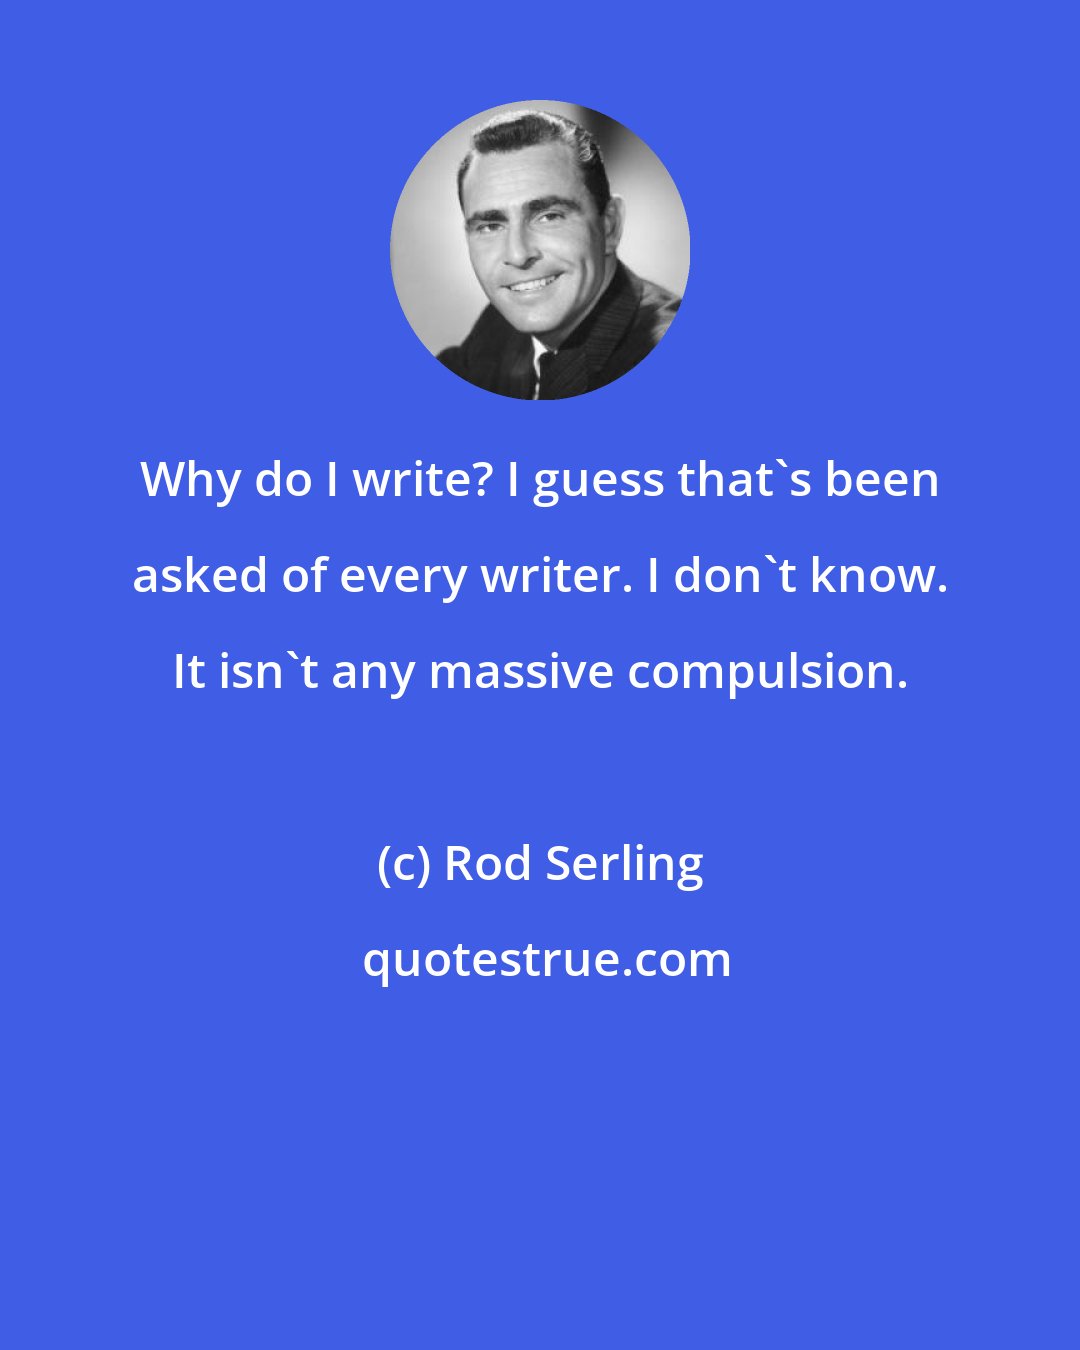 Rod Serling: Why do I write? I guess that's been asked of every writer. I don't know. It isn't any massive compulsion.